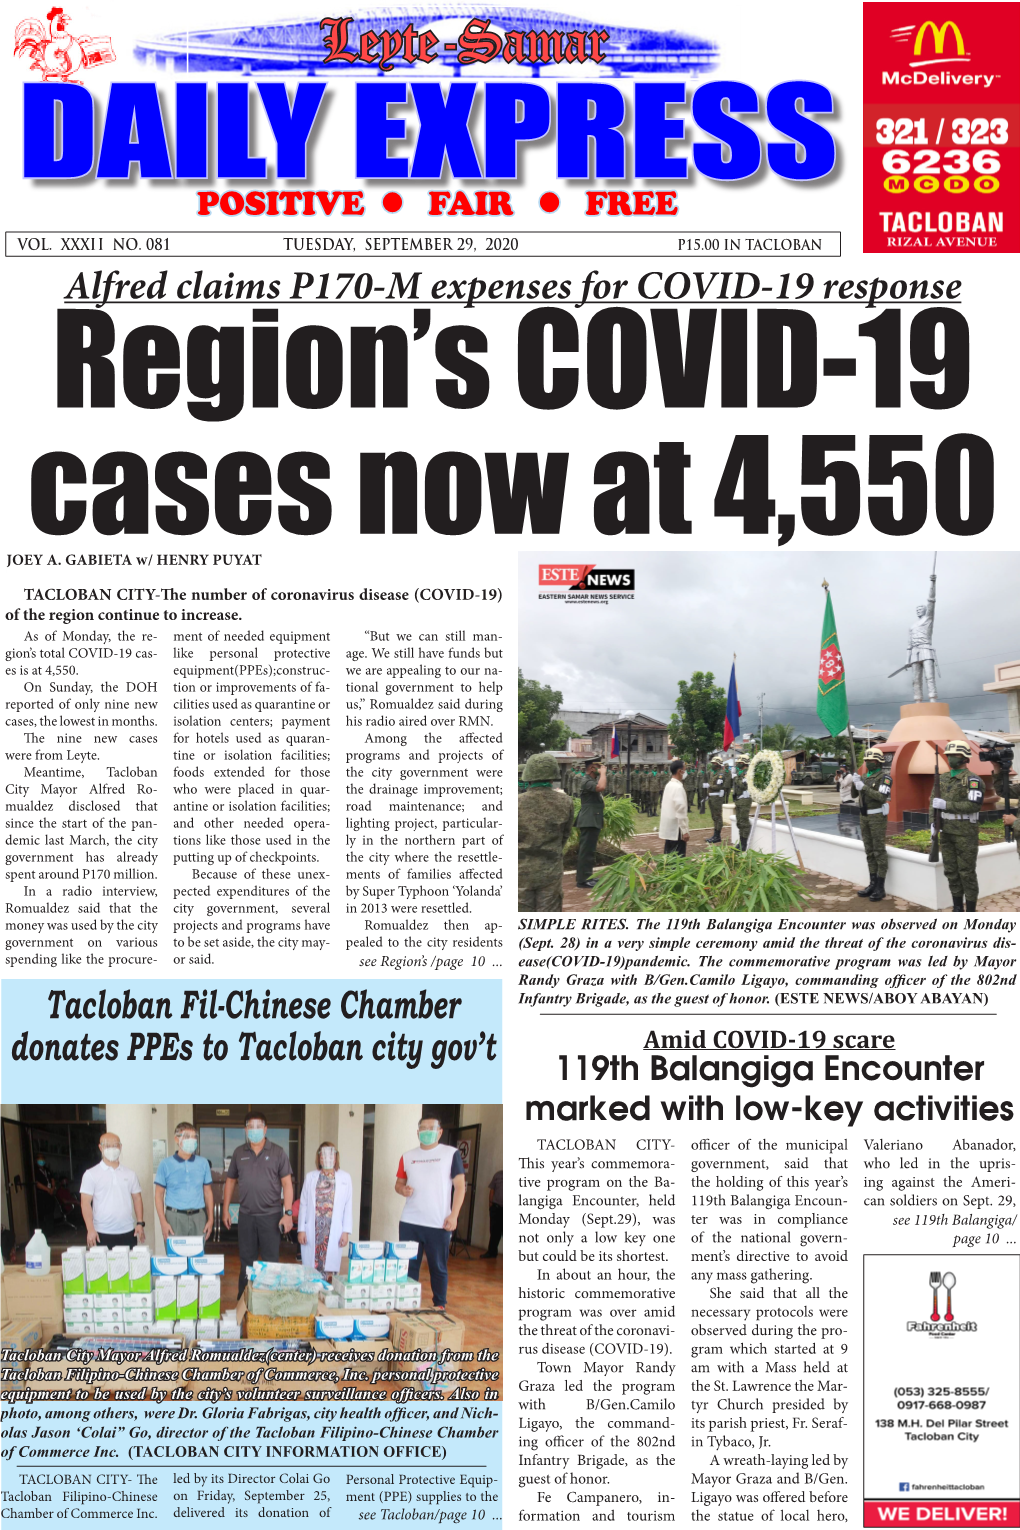 Daily Express NEWS Tuesday, September 29, 2020 Biliran Capital Restricts Deped-E